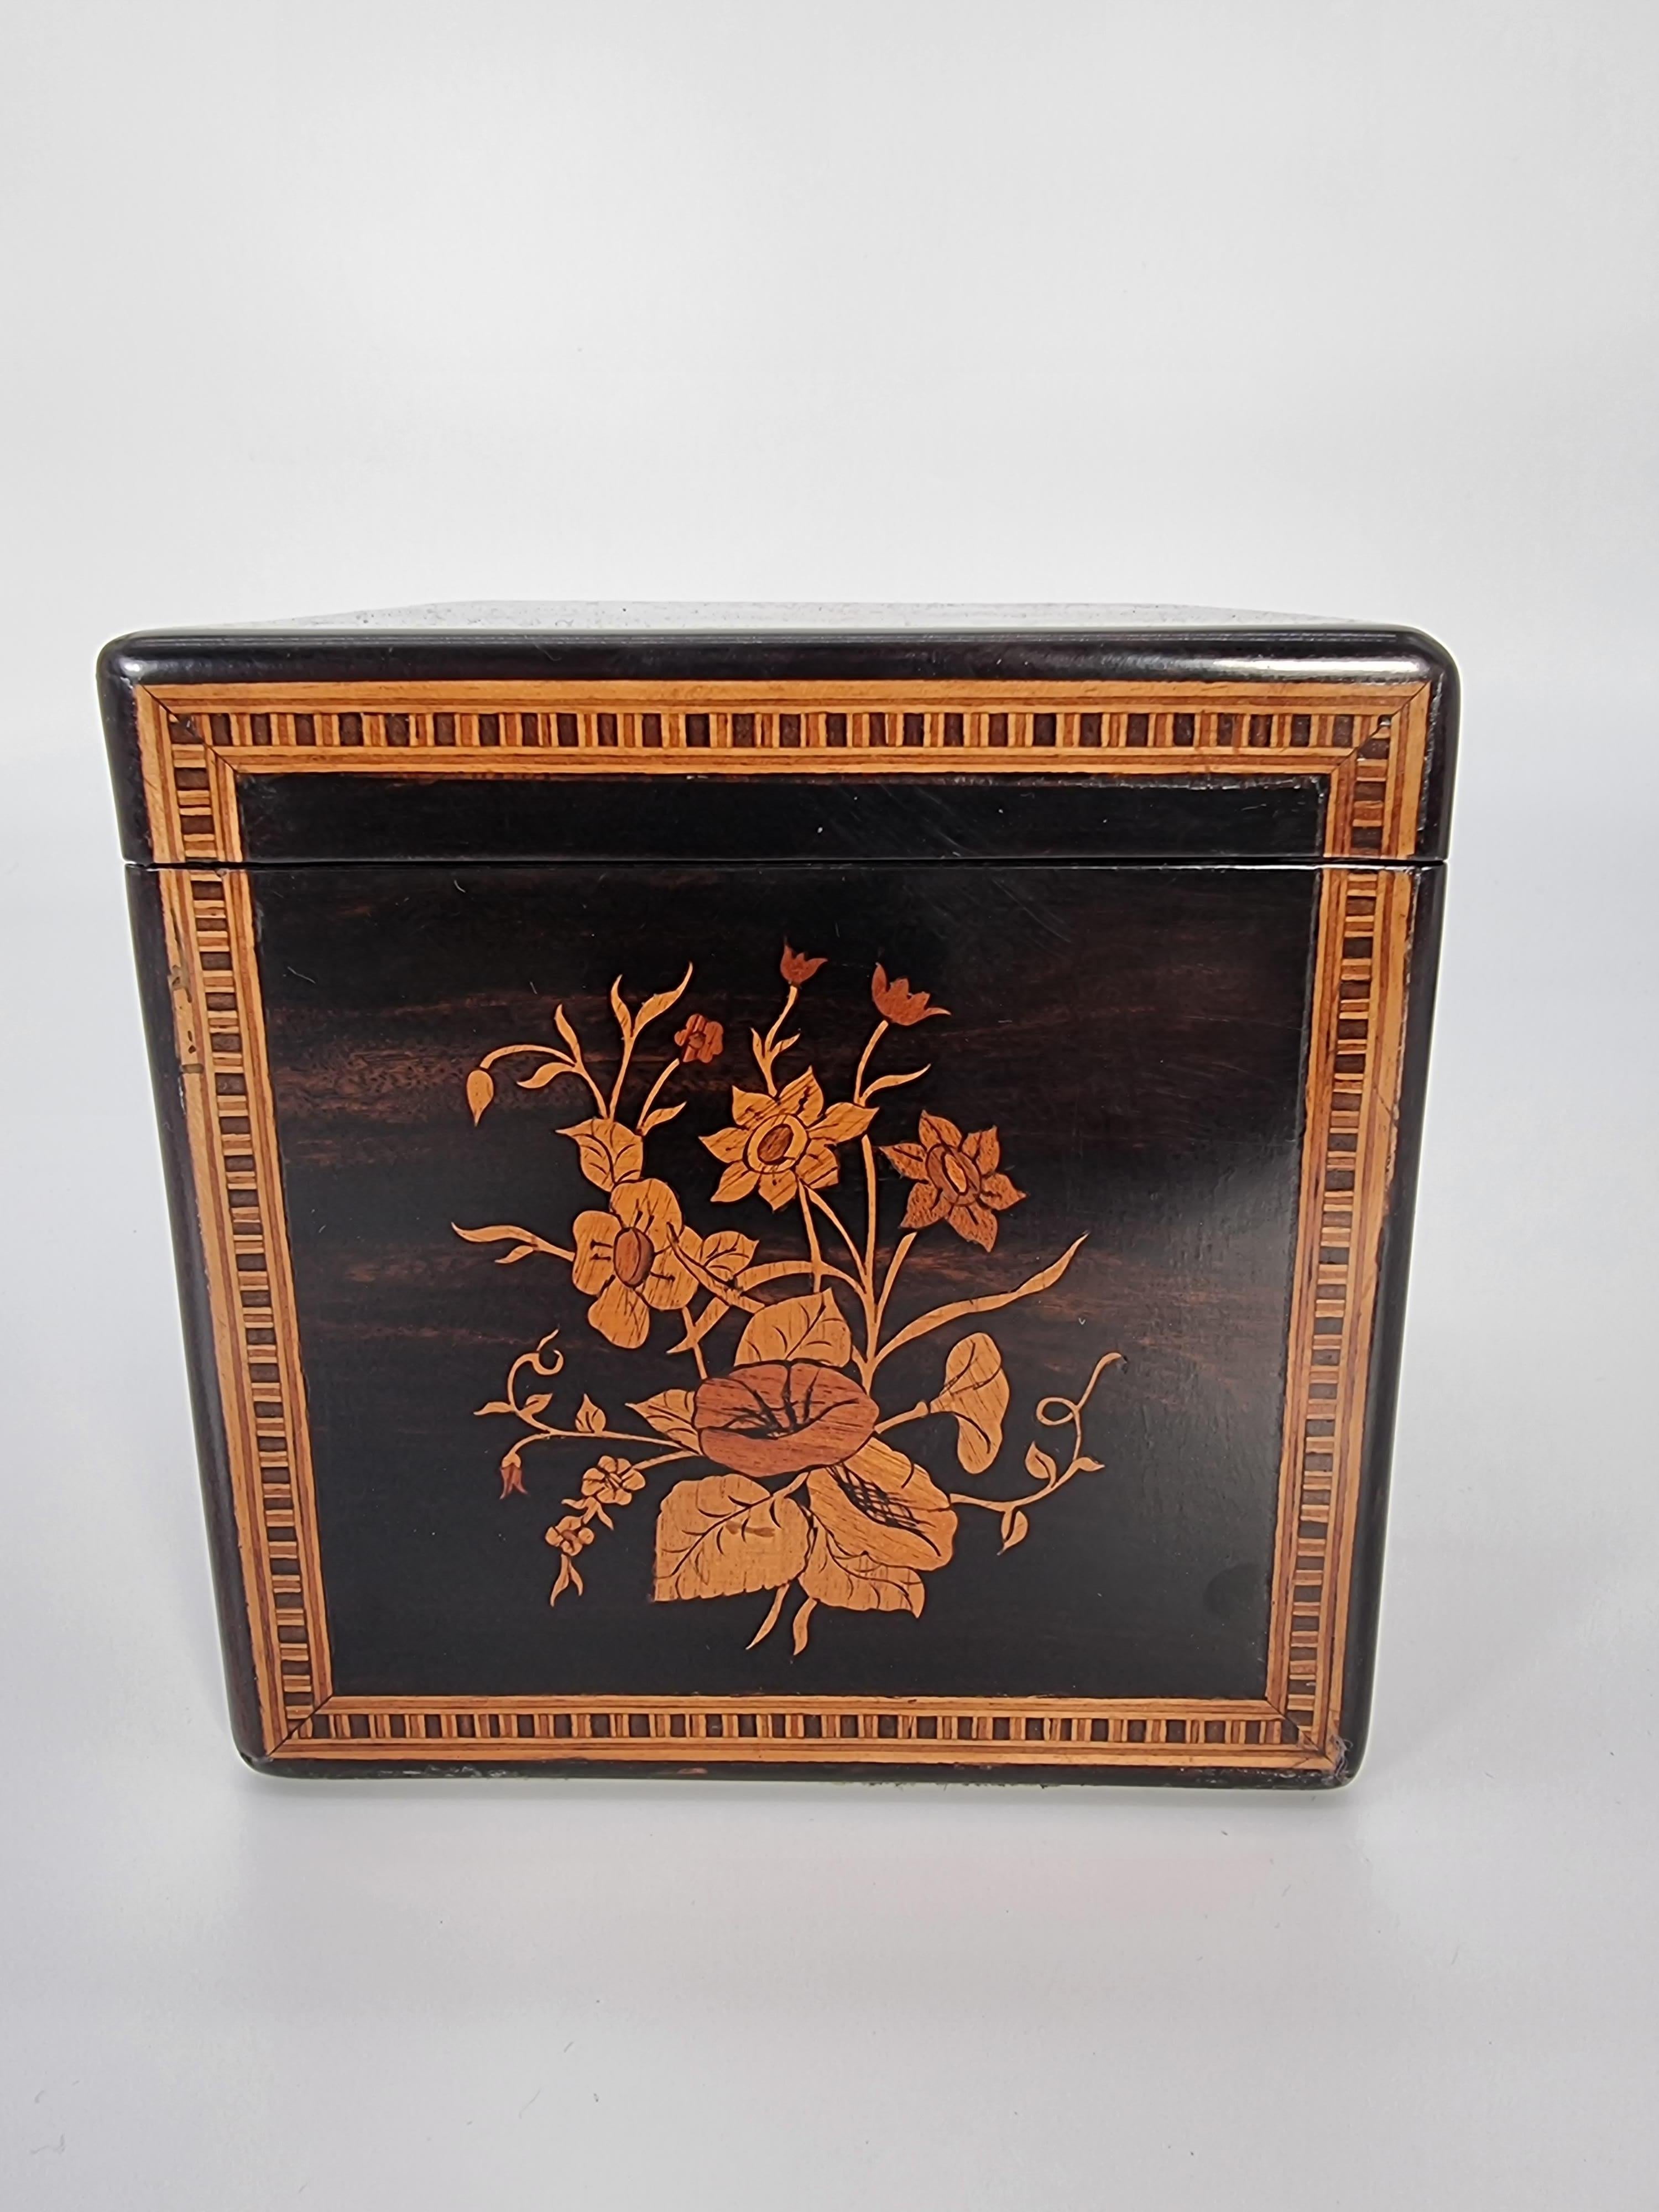 Marquetry A mid 19th century Italian grand tour Sorrento marquetry box circa 1860 For Sale